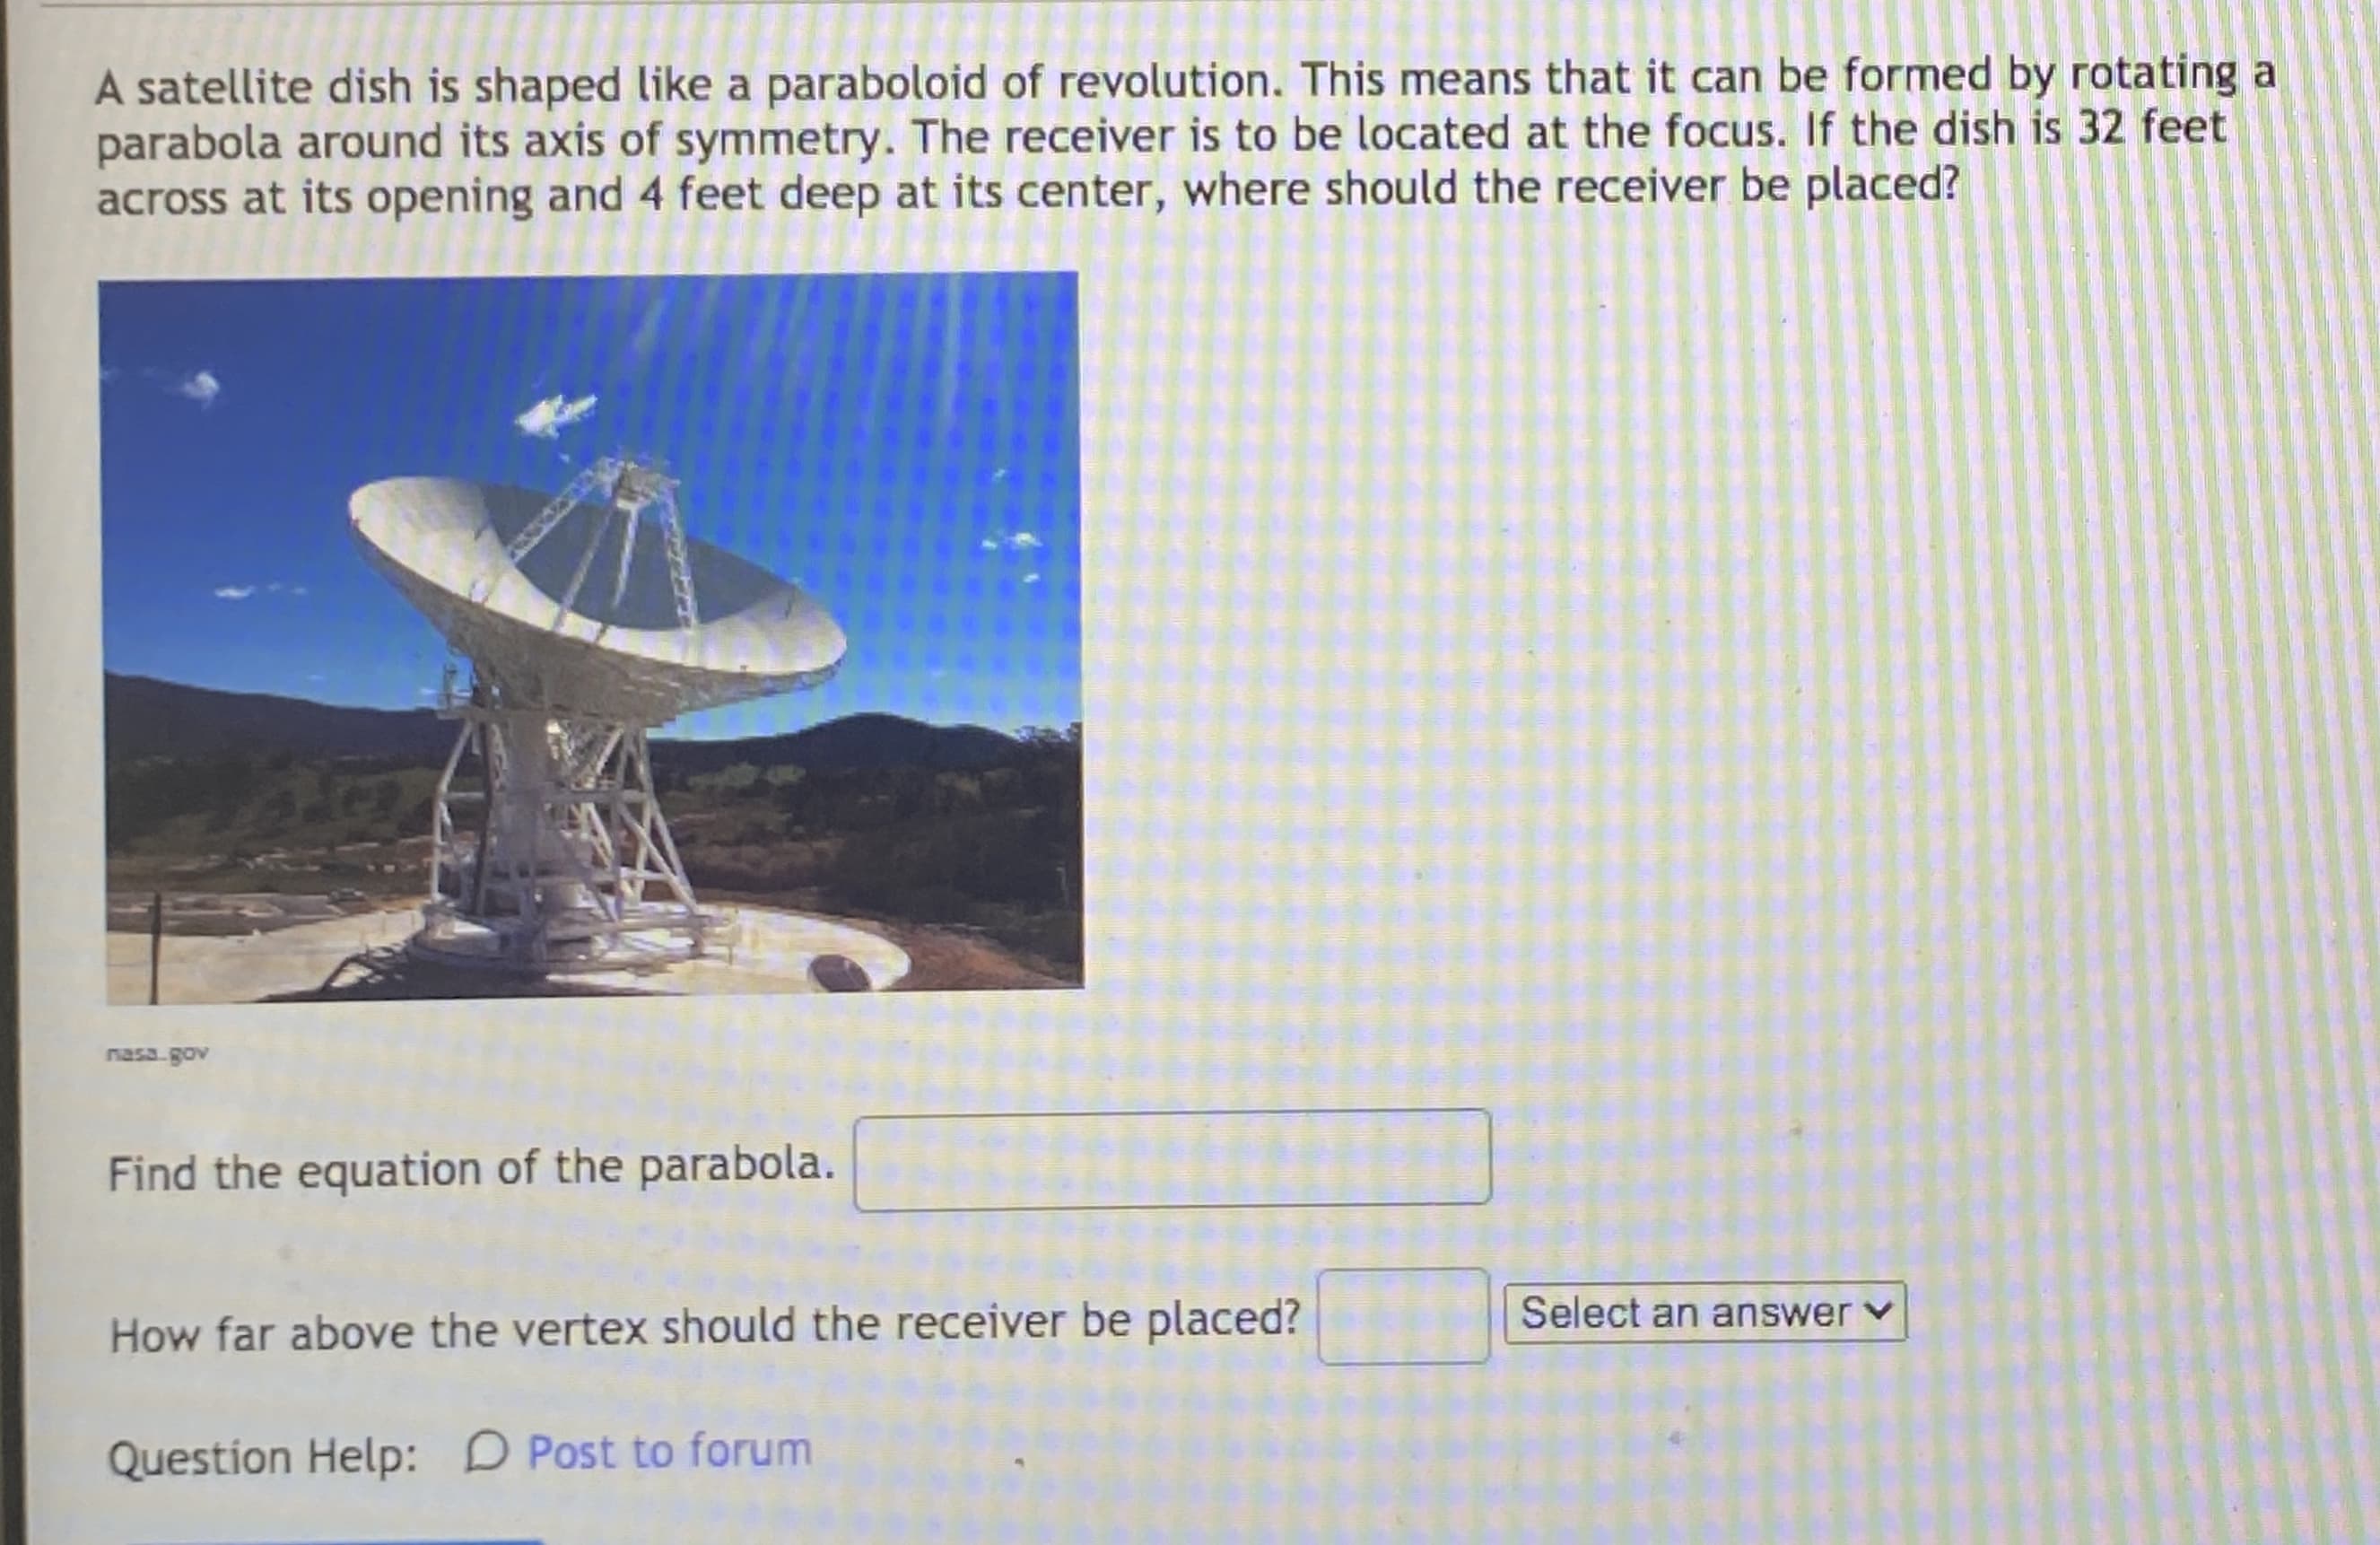 A satellite dish is shaped like a paraboloid of revolution. This means that it can be formed by rotating a
parabola around its axis of symmetry. The receiver is to be located at the focus. If the dish is 32 feet
across at its opening and 4 feet deep at its center, where should the receiver be placed?
